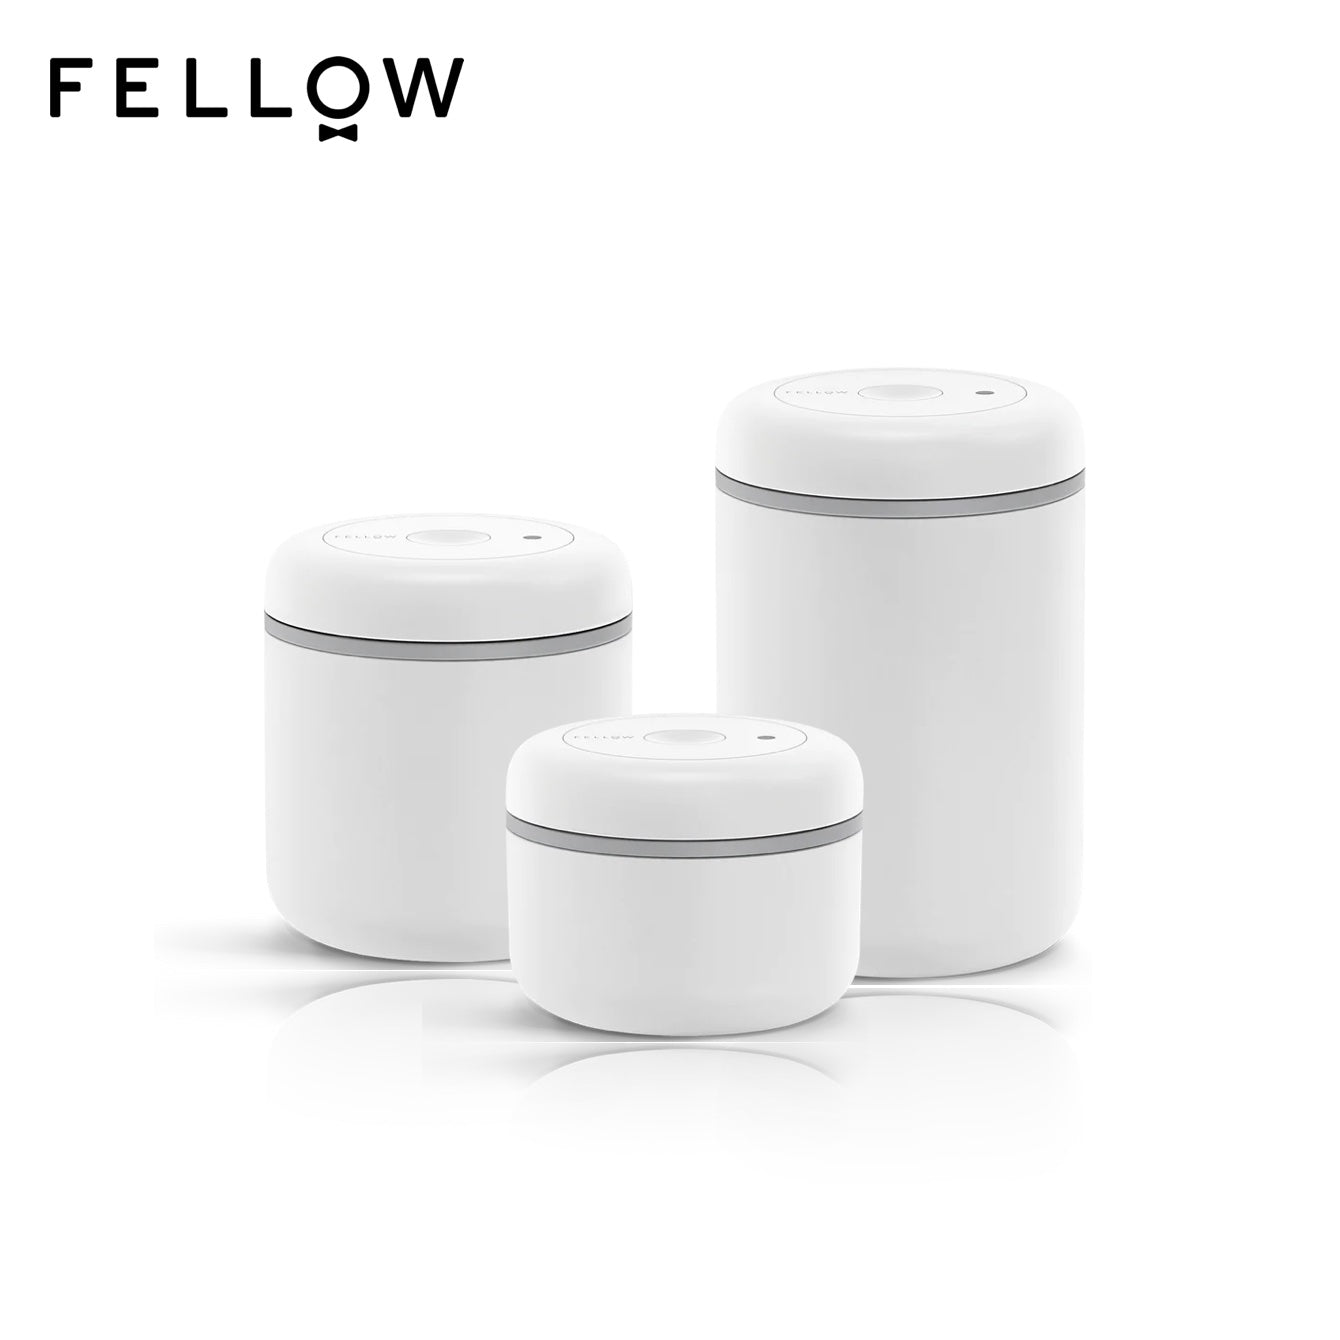 Fellow Atmos Vacuum Canister white